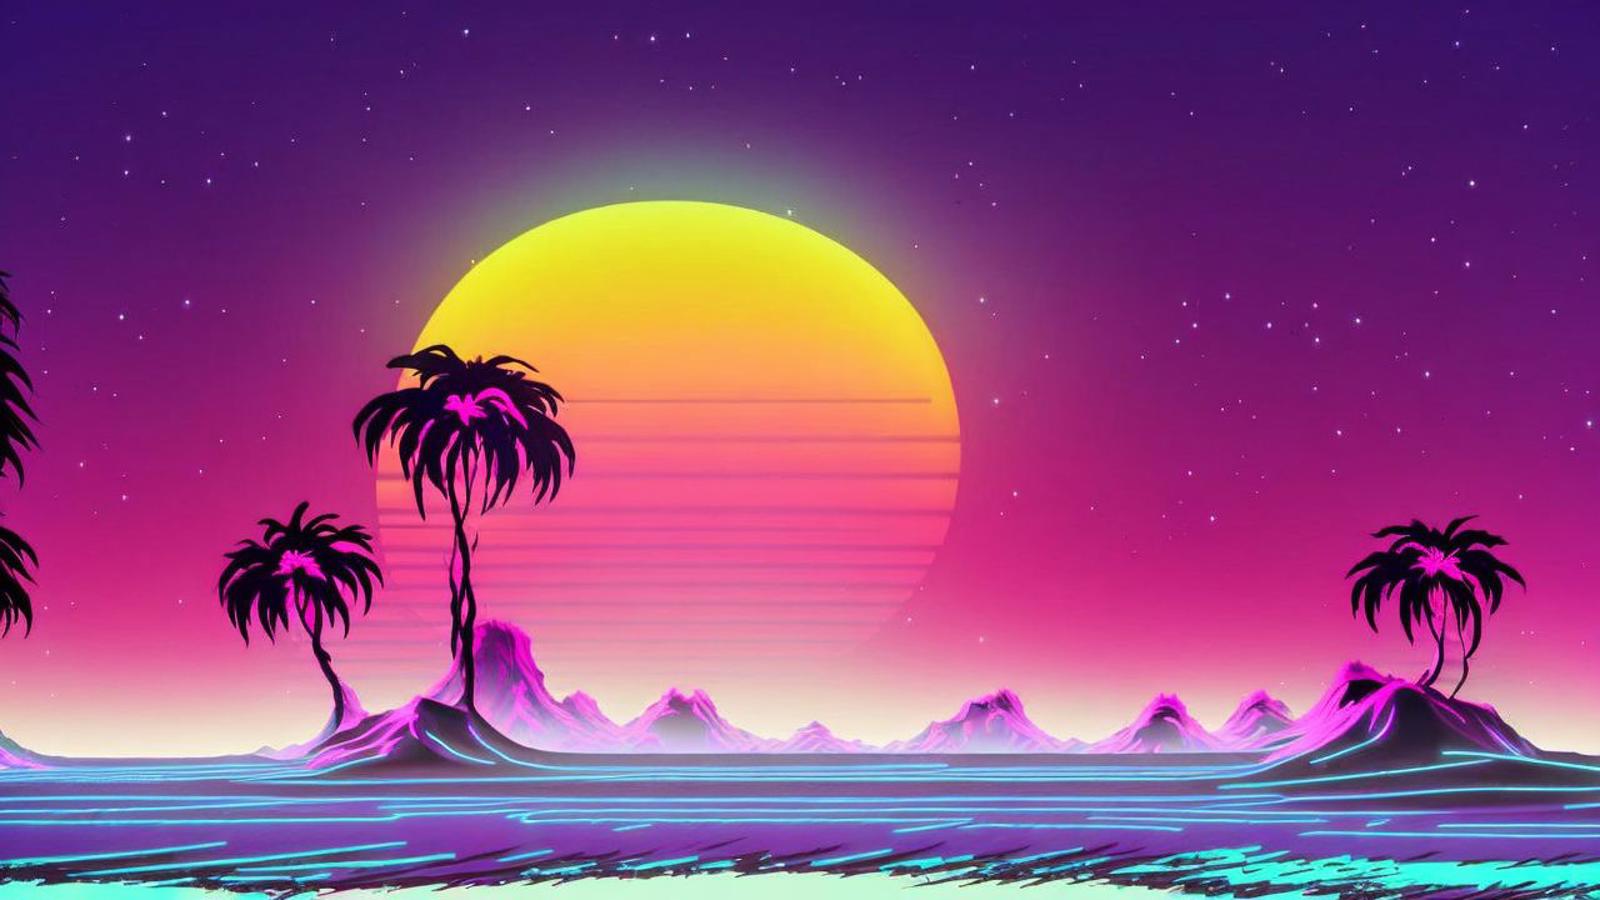 Retrowave image by marusame